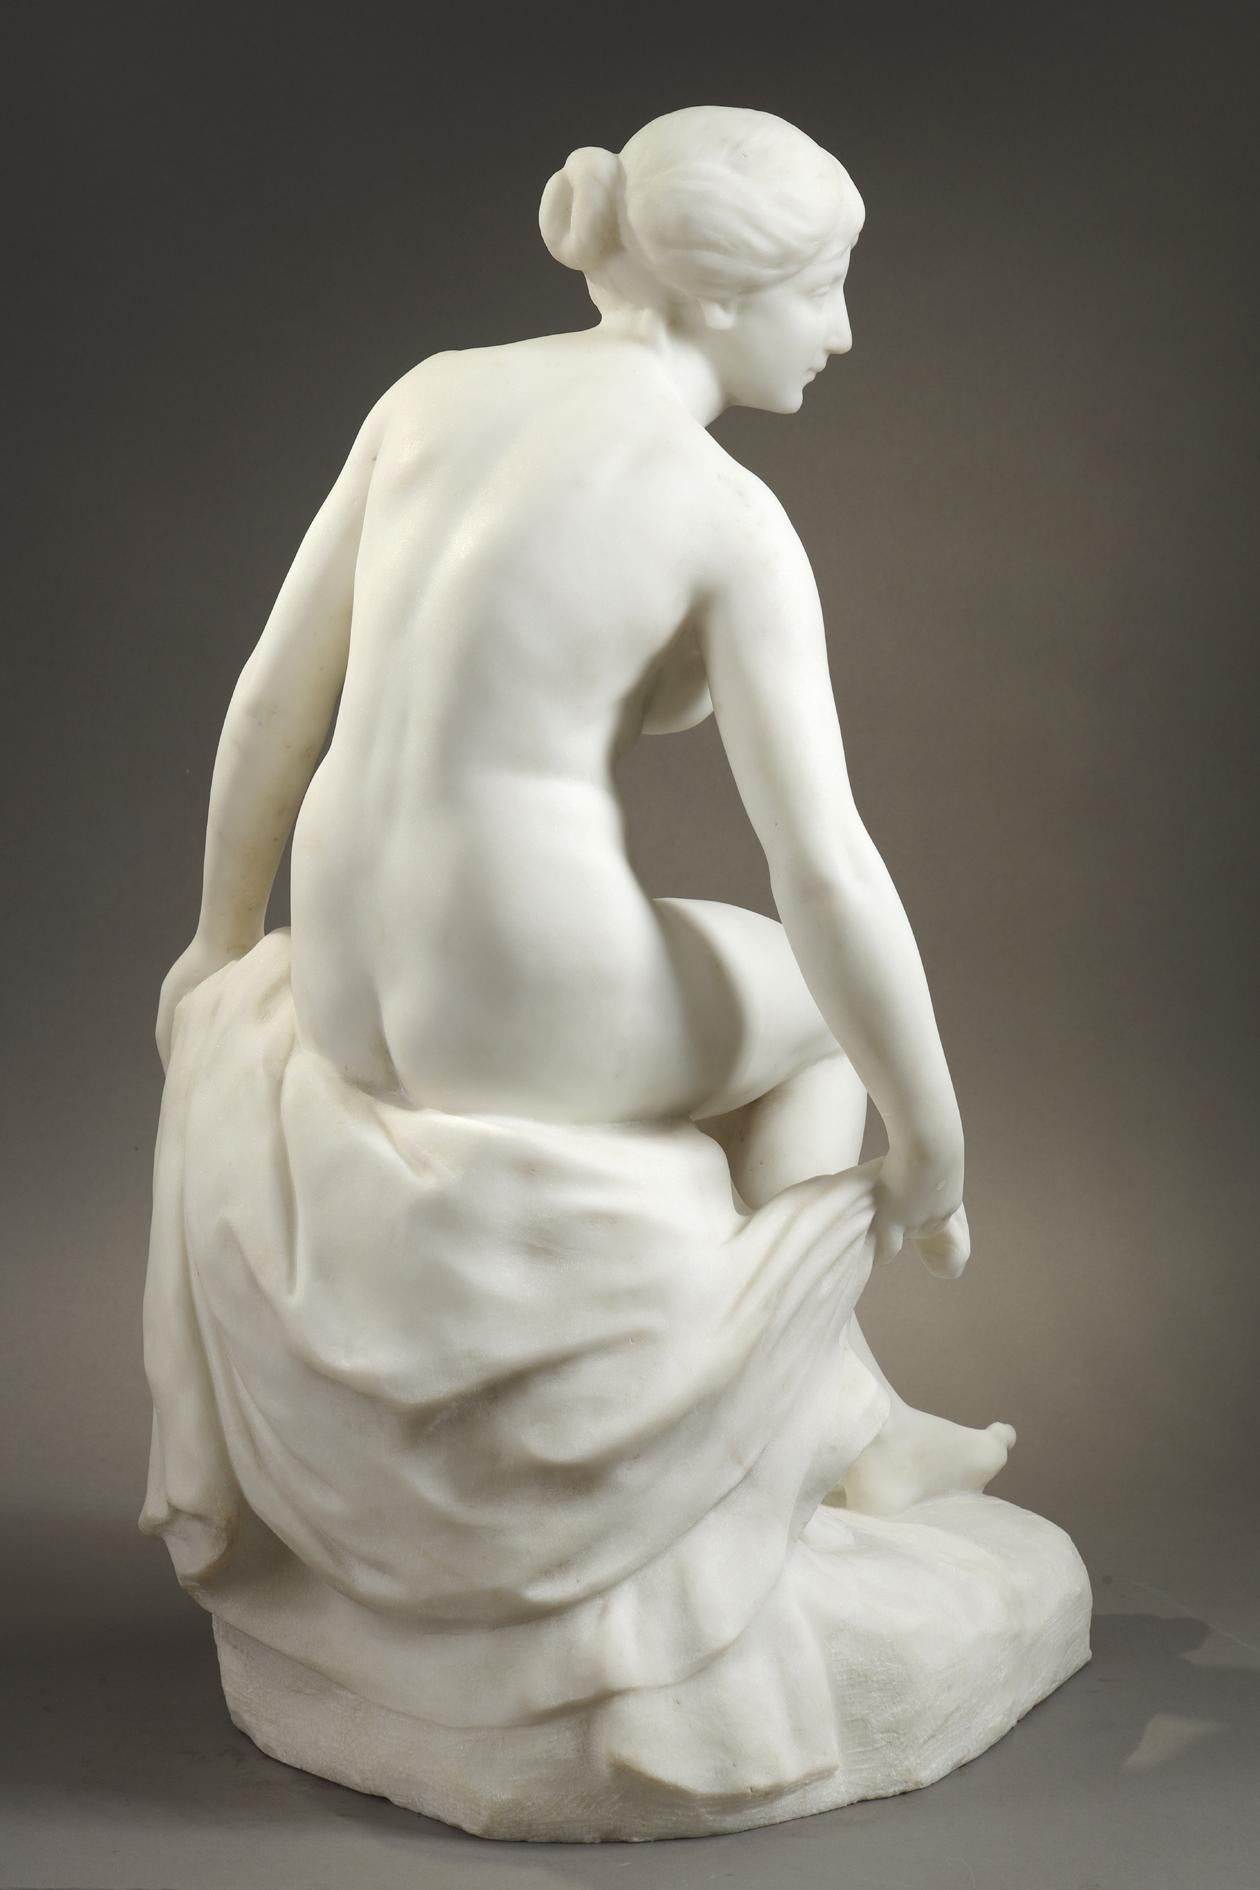 Bather
by Etienne Hachenburger (19th-20th C.)

Sculpture in white Carrara marble
Signed on the side of the base 